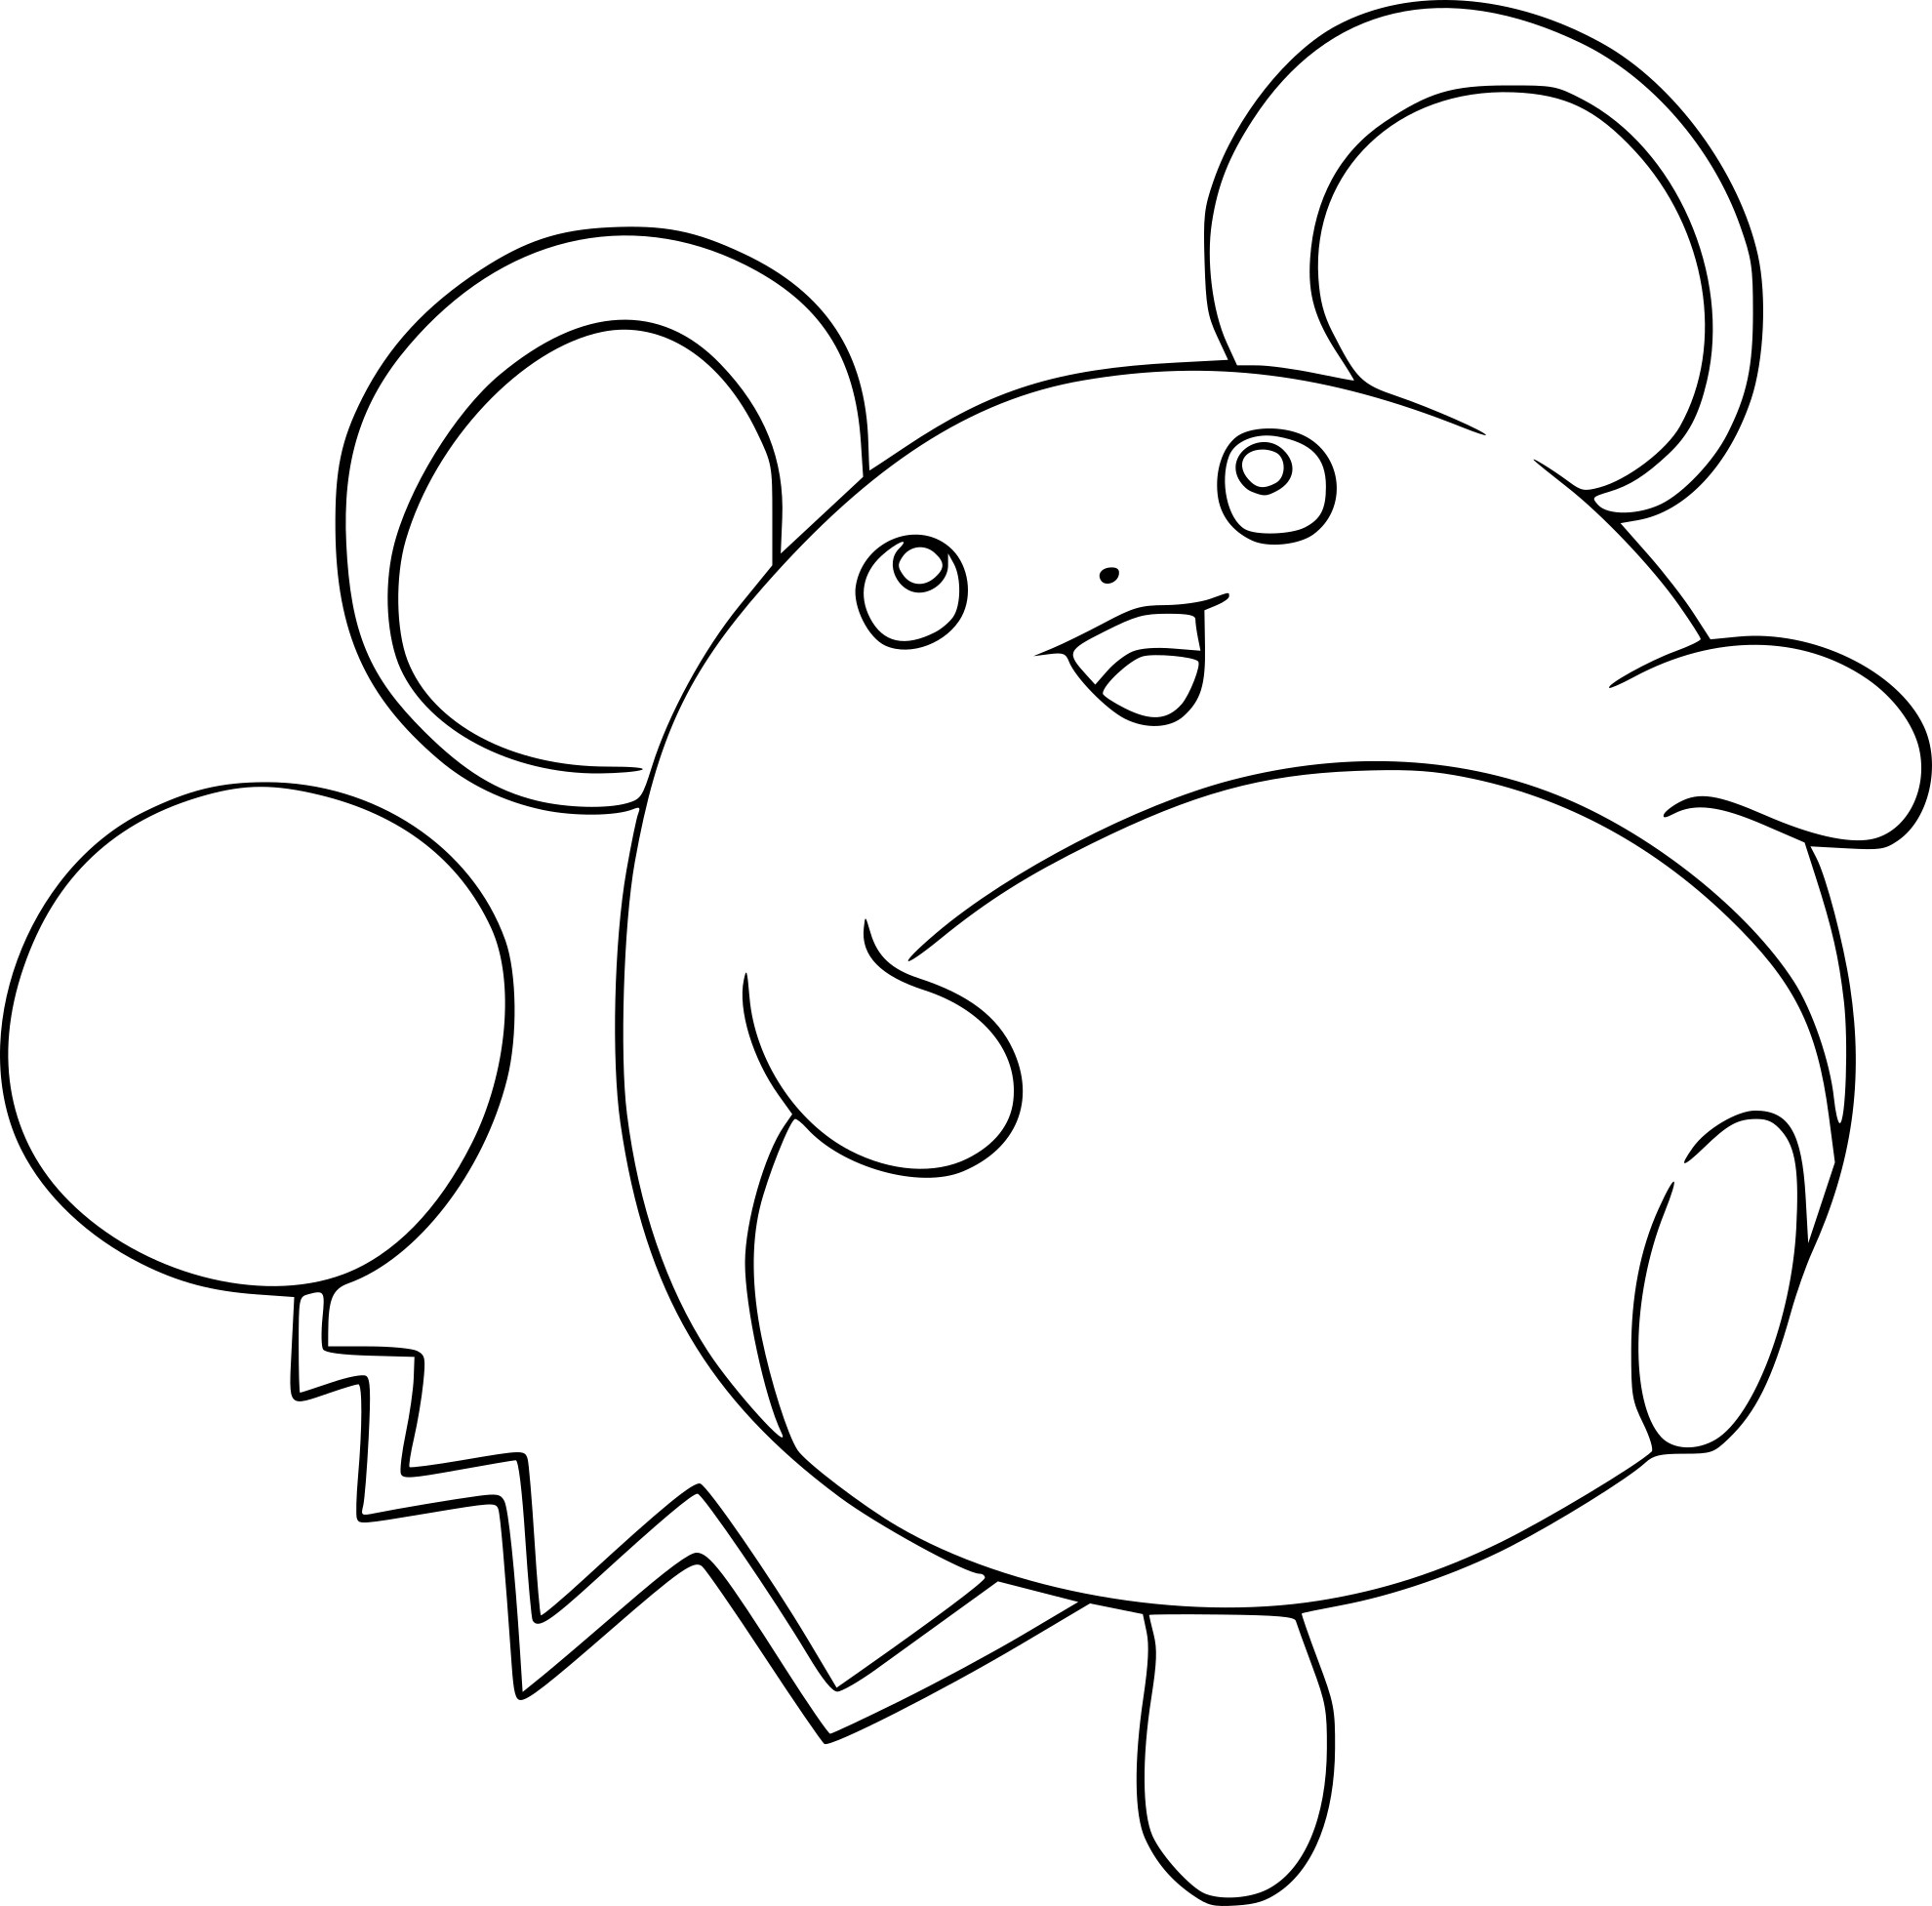 Marill Pokemon coloring page